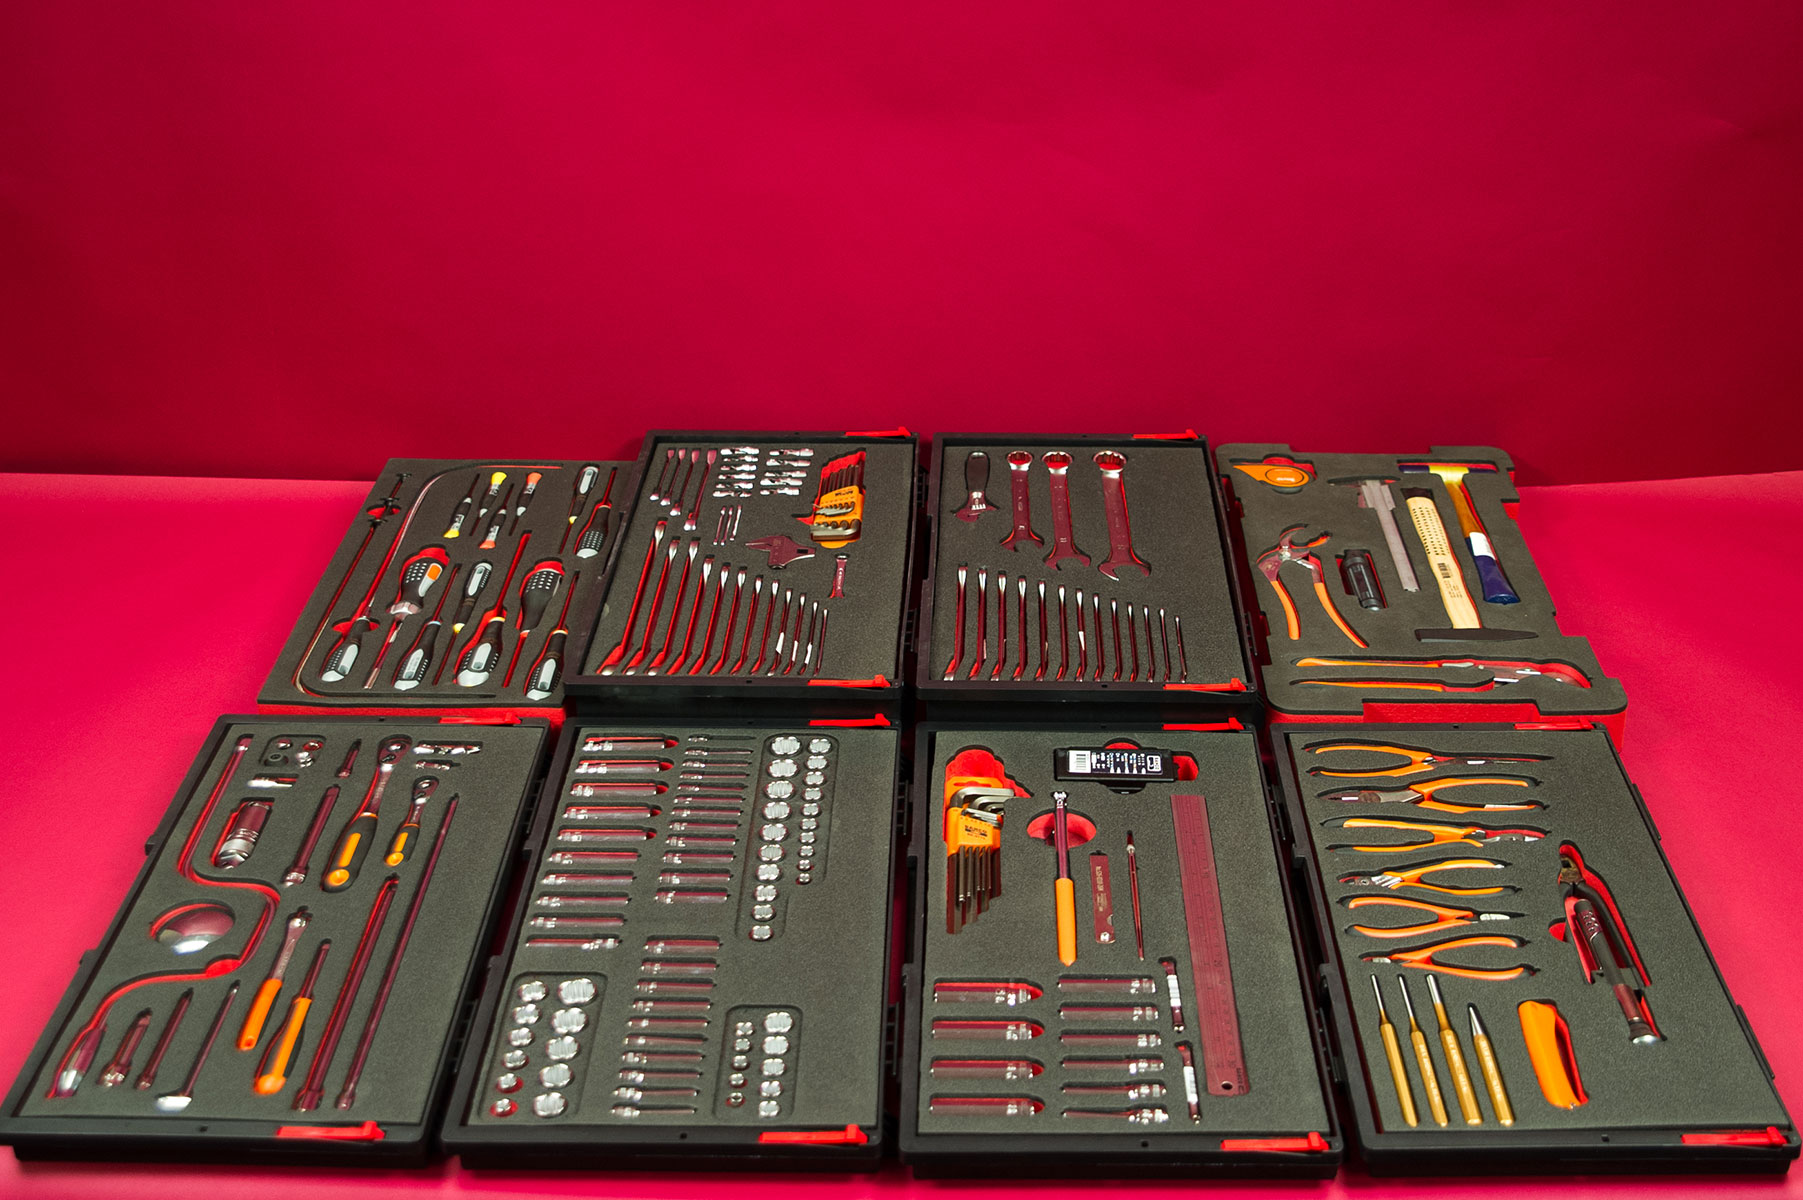 RBI9500T Mechanic Hand Carry Tool Kit– Imperial (SAE / Standard) Kit,  includes 160 Tools - Priceless Aviation Products